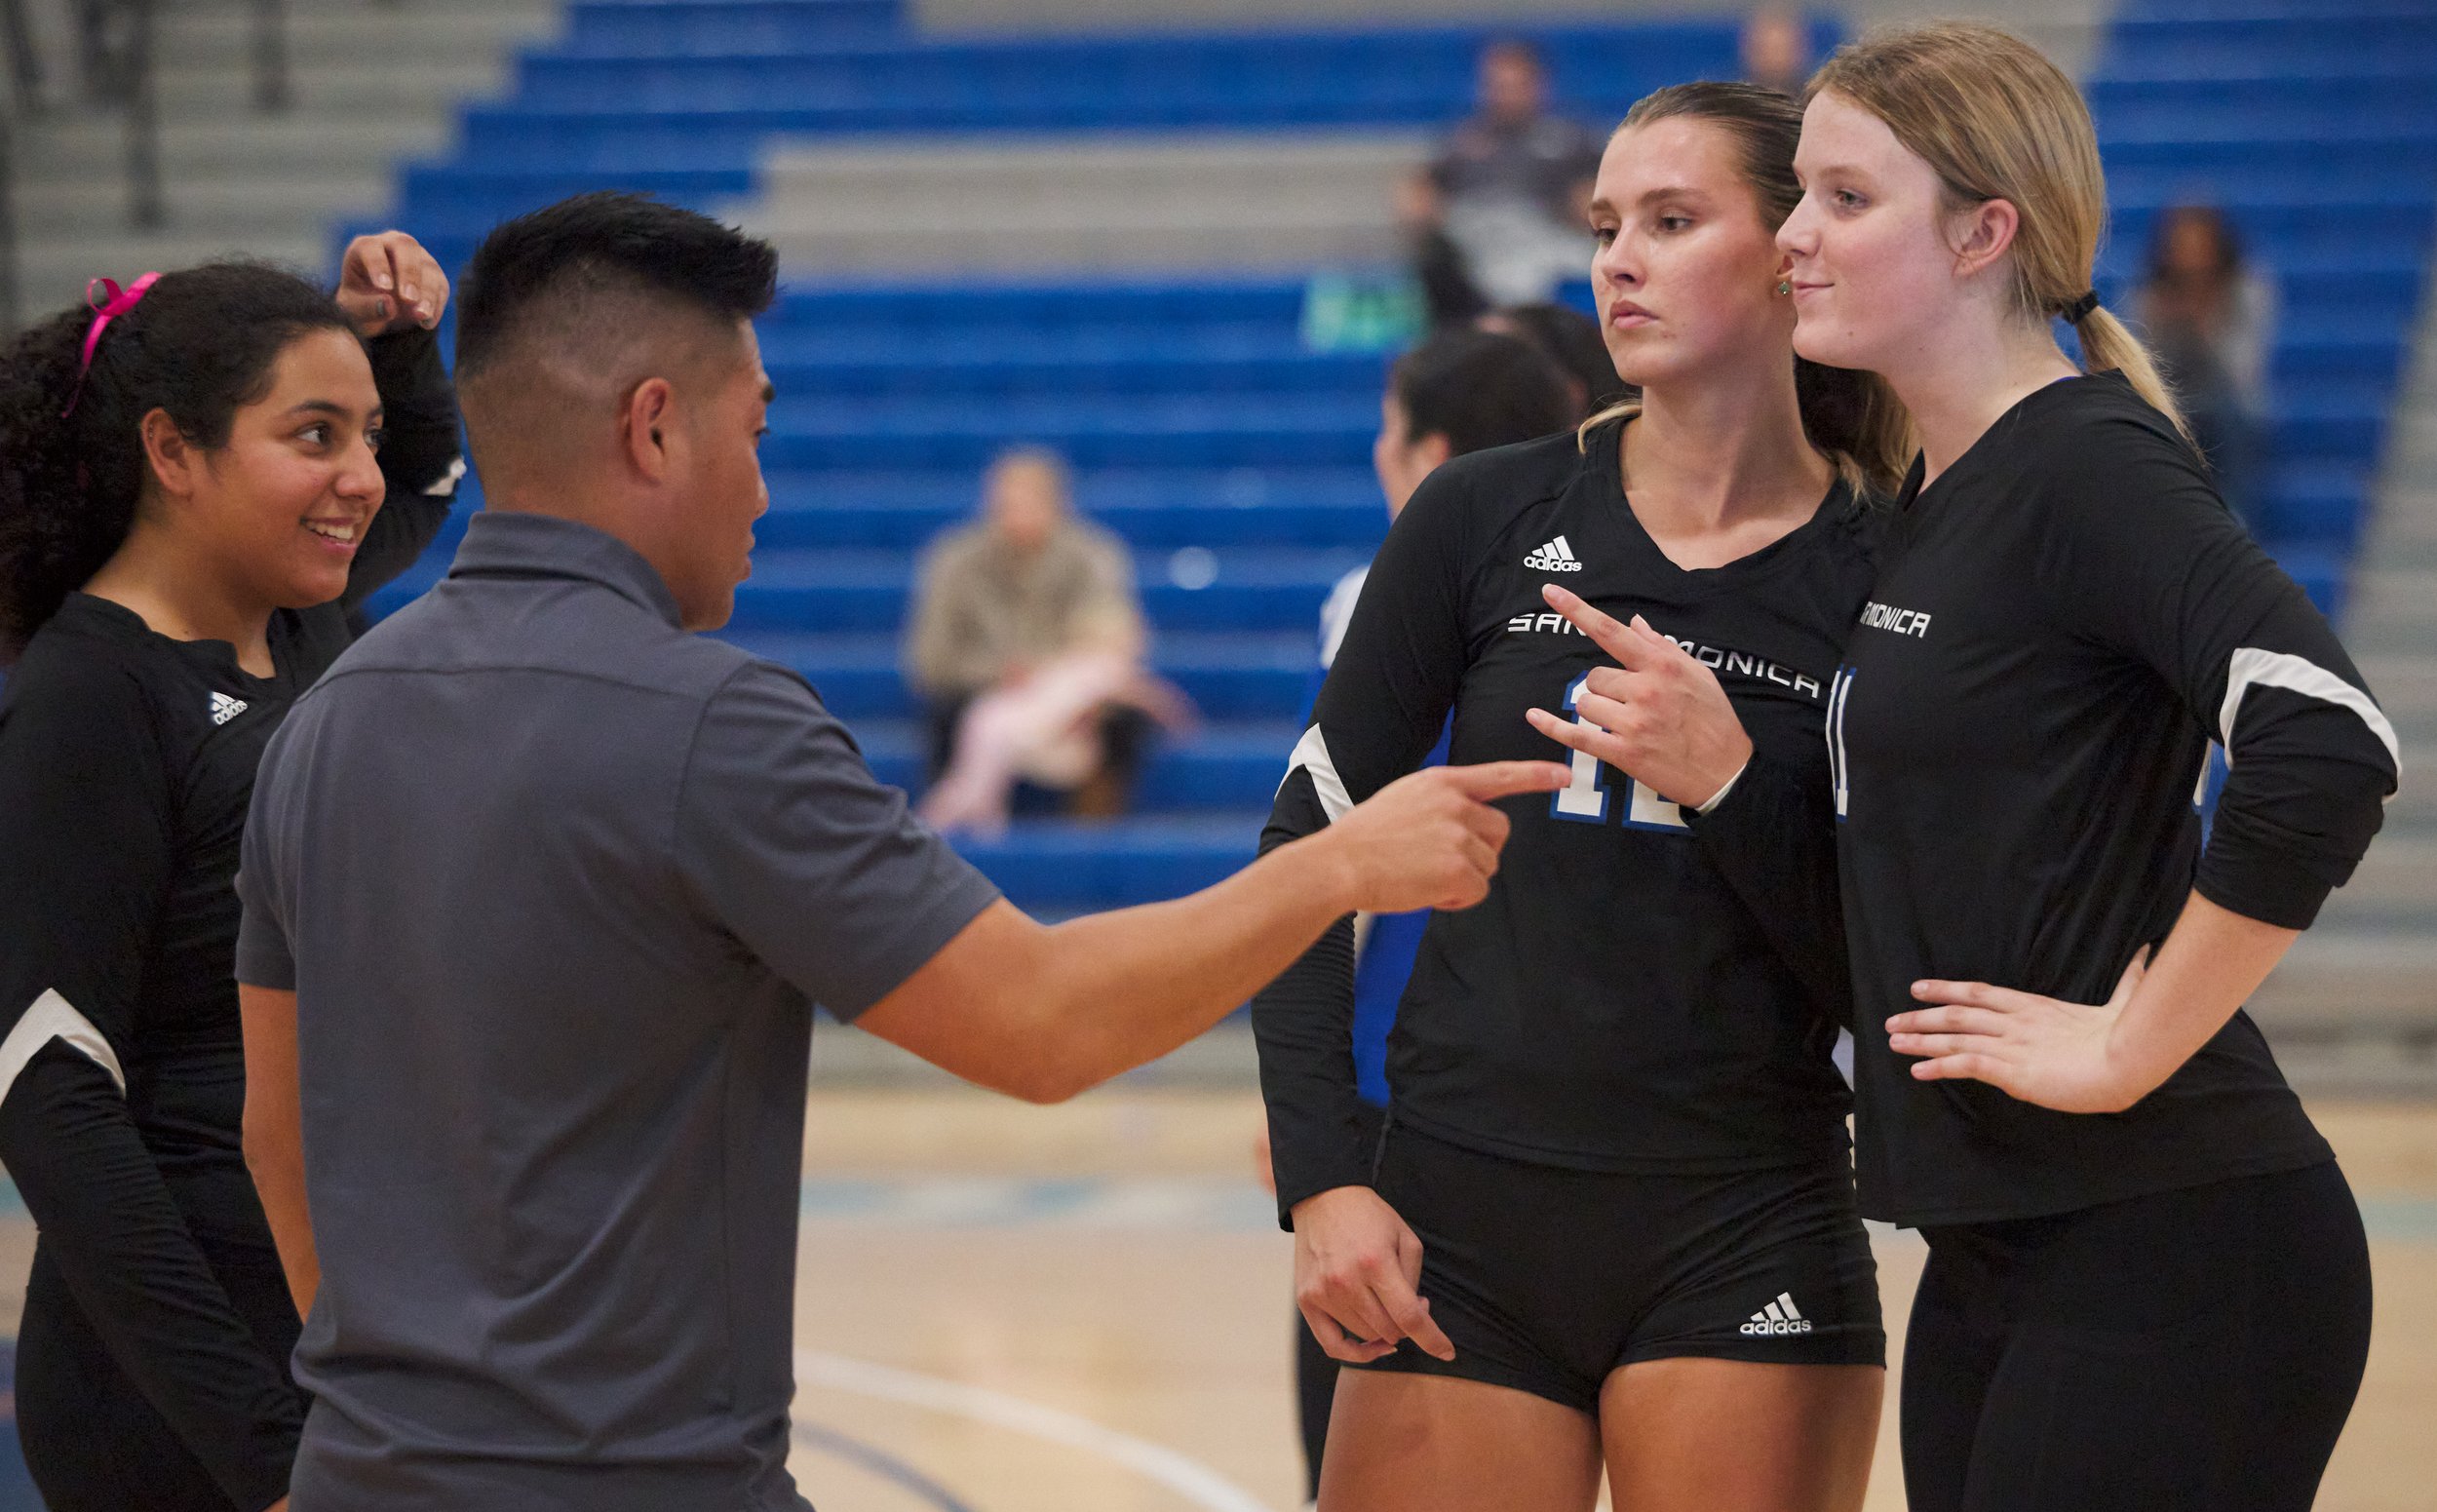  Santa Monica College Corsairs Women's Volleyball Head Coach Christian Cammayo (center left) talks to Jaylynn Fierro (left), Mia Paulson (center right), and Mylah Niksa (right)  during the match against the Citrus College Owls on Wednesday, Oct. 25, 